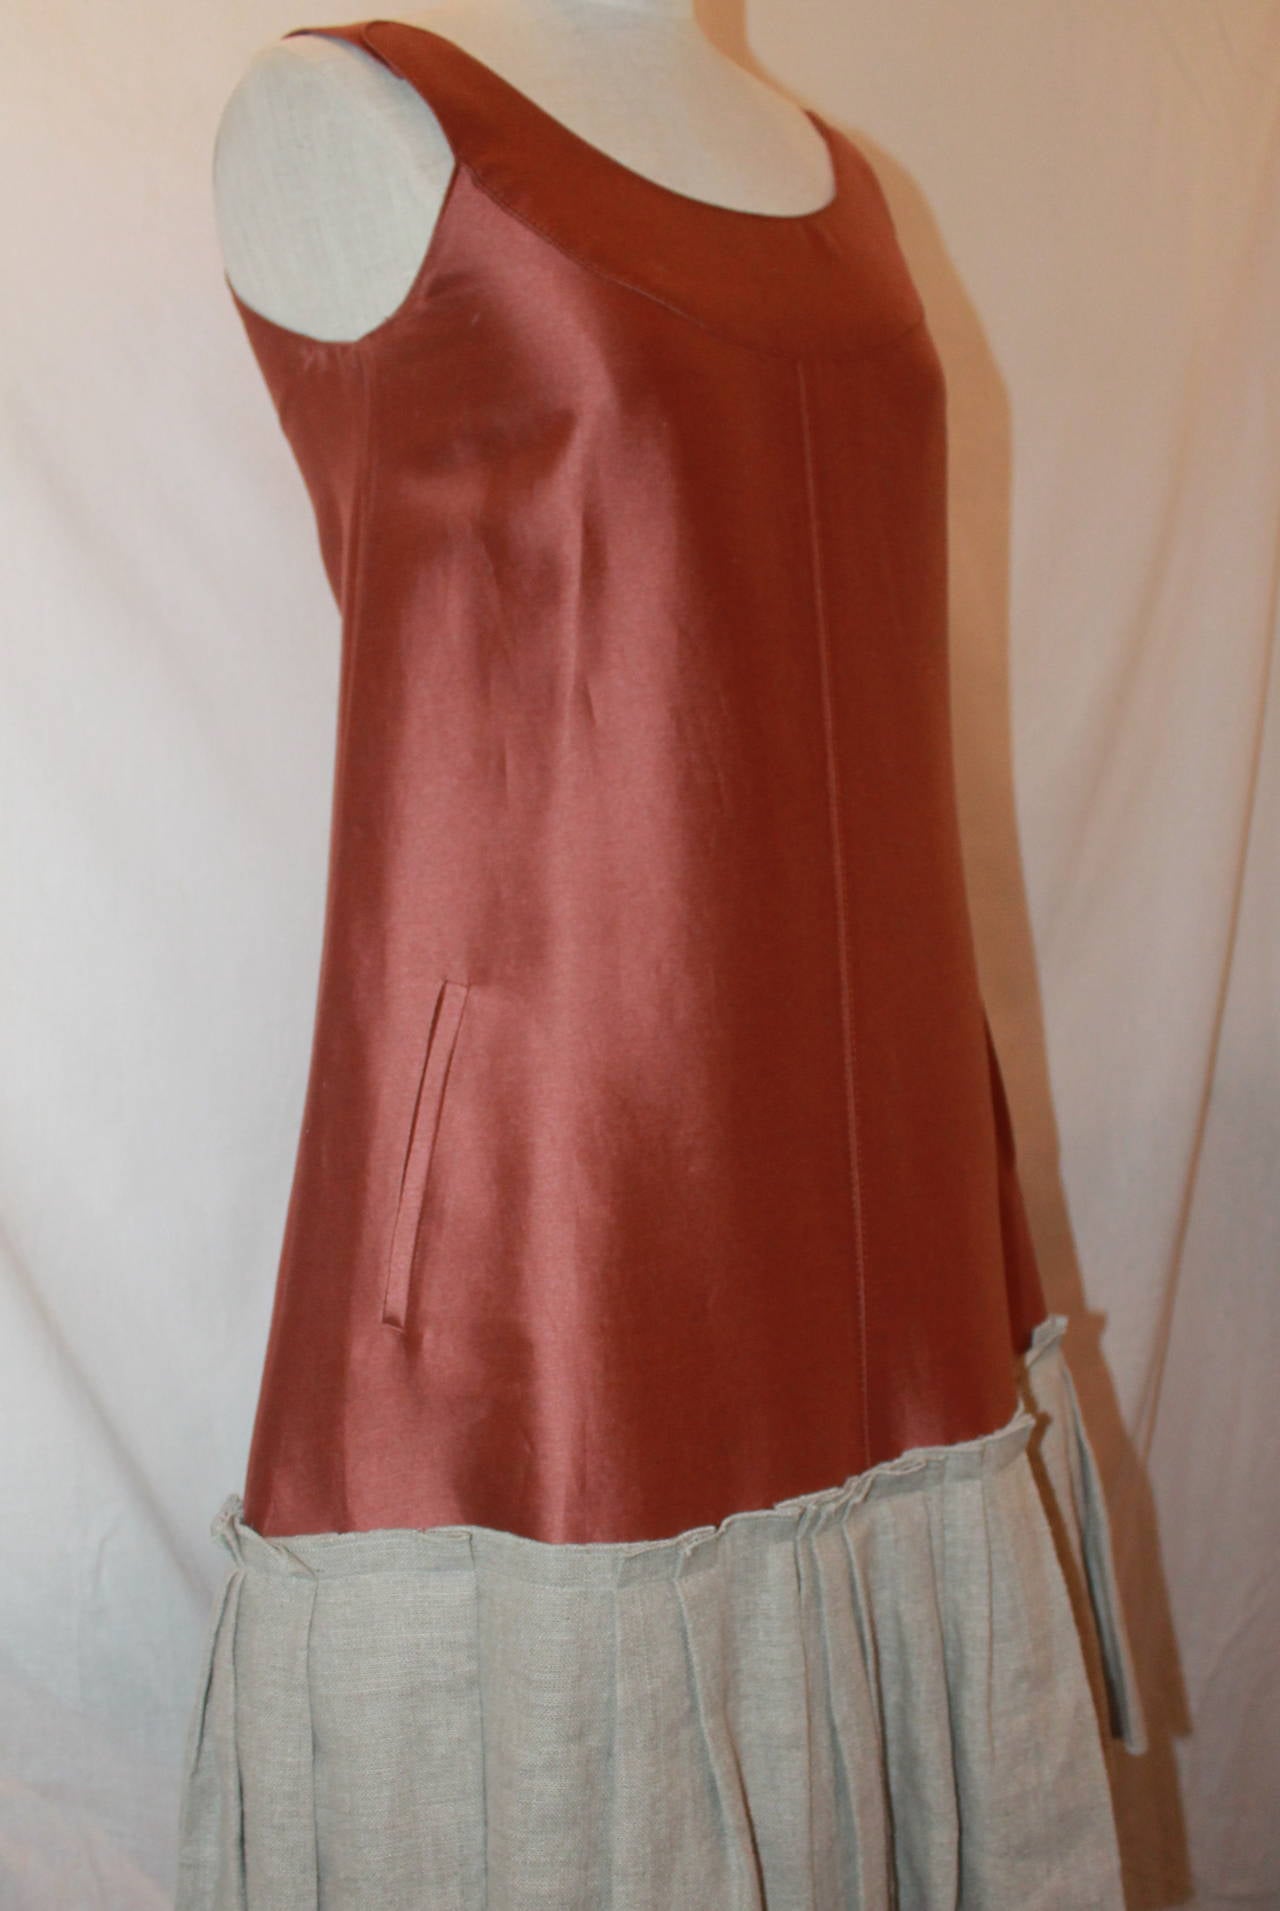 Oscar De La Renta Burnt Brown & Canvas Flare Dress - 2. This dress is in excellent condition and has 2 pockets. 

Measurements:
Bust- 35